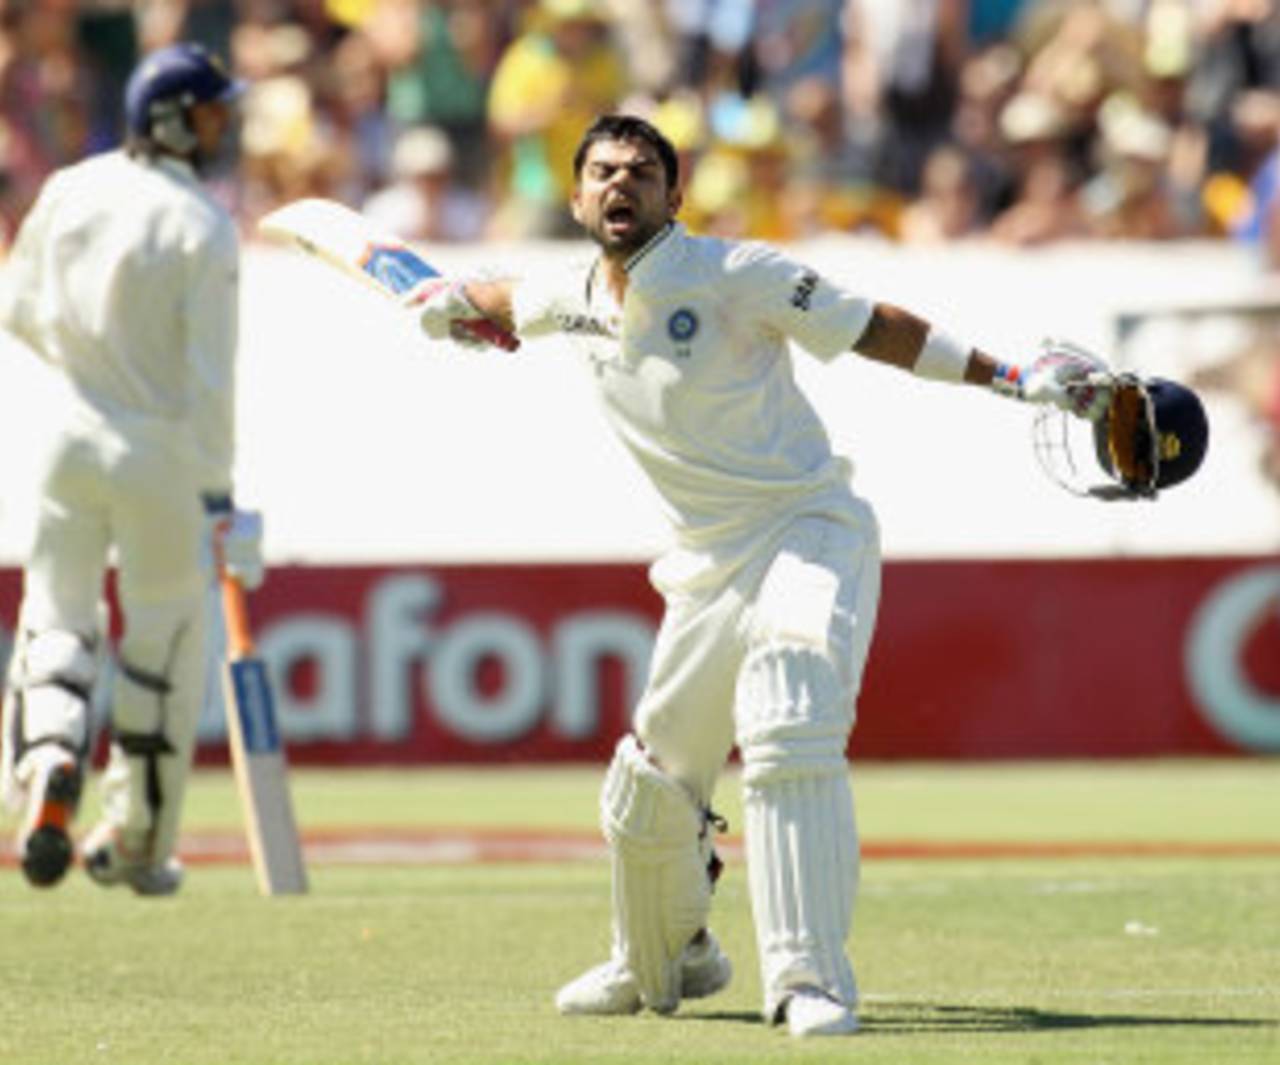 Virat Kohli is pumped up after getting to his maiden Test ton, Australia v India, 4th Test, Adelaide, 3rd day, January 26, 2012